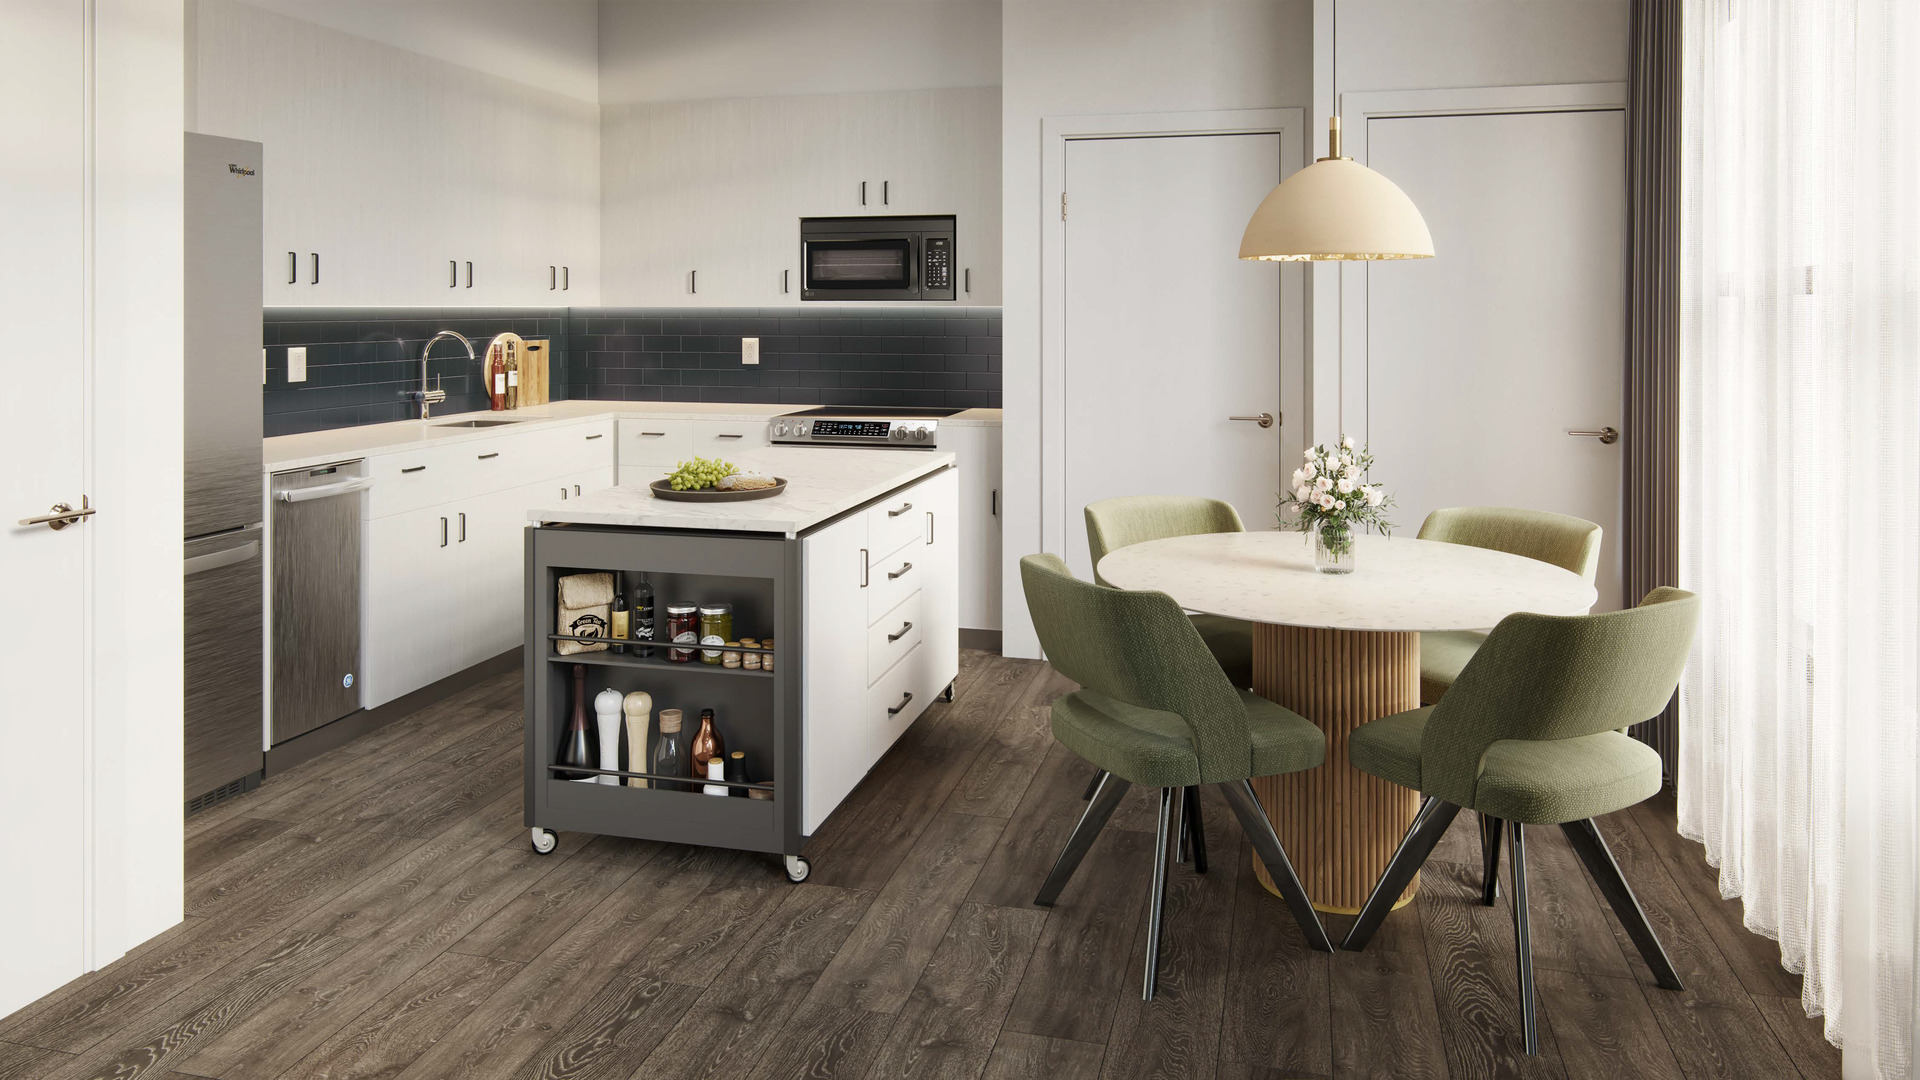 Sleek finishes & top-of-the-line appliances will elevate your culinary experience